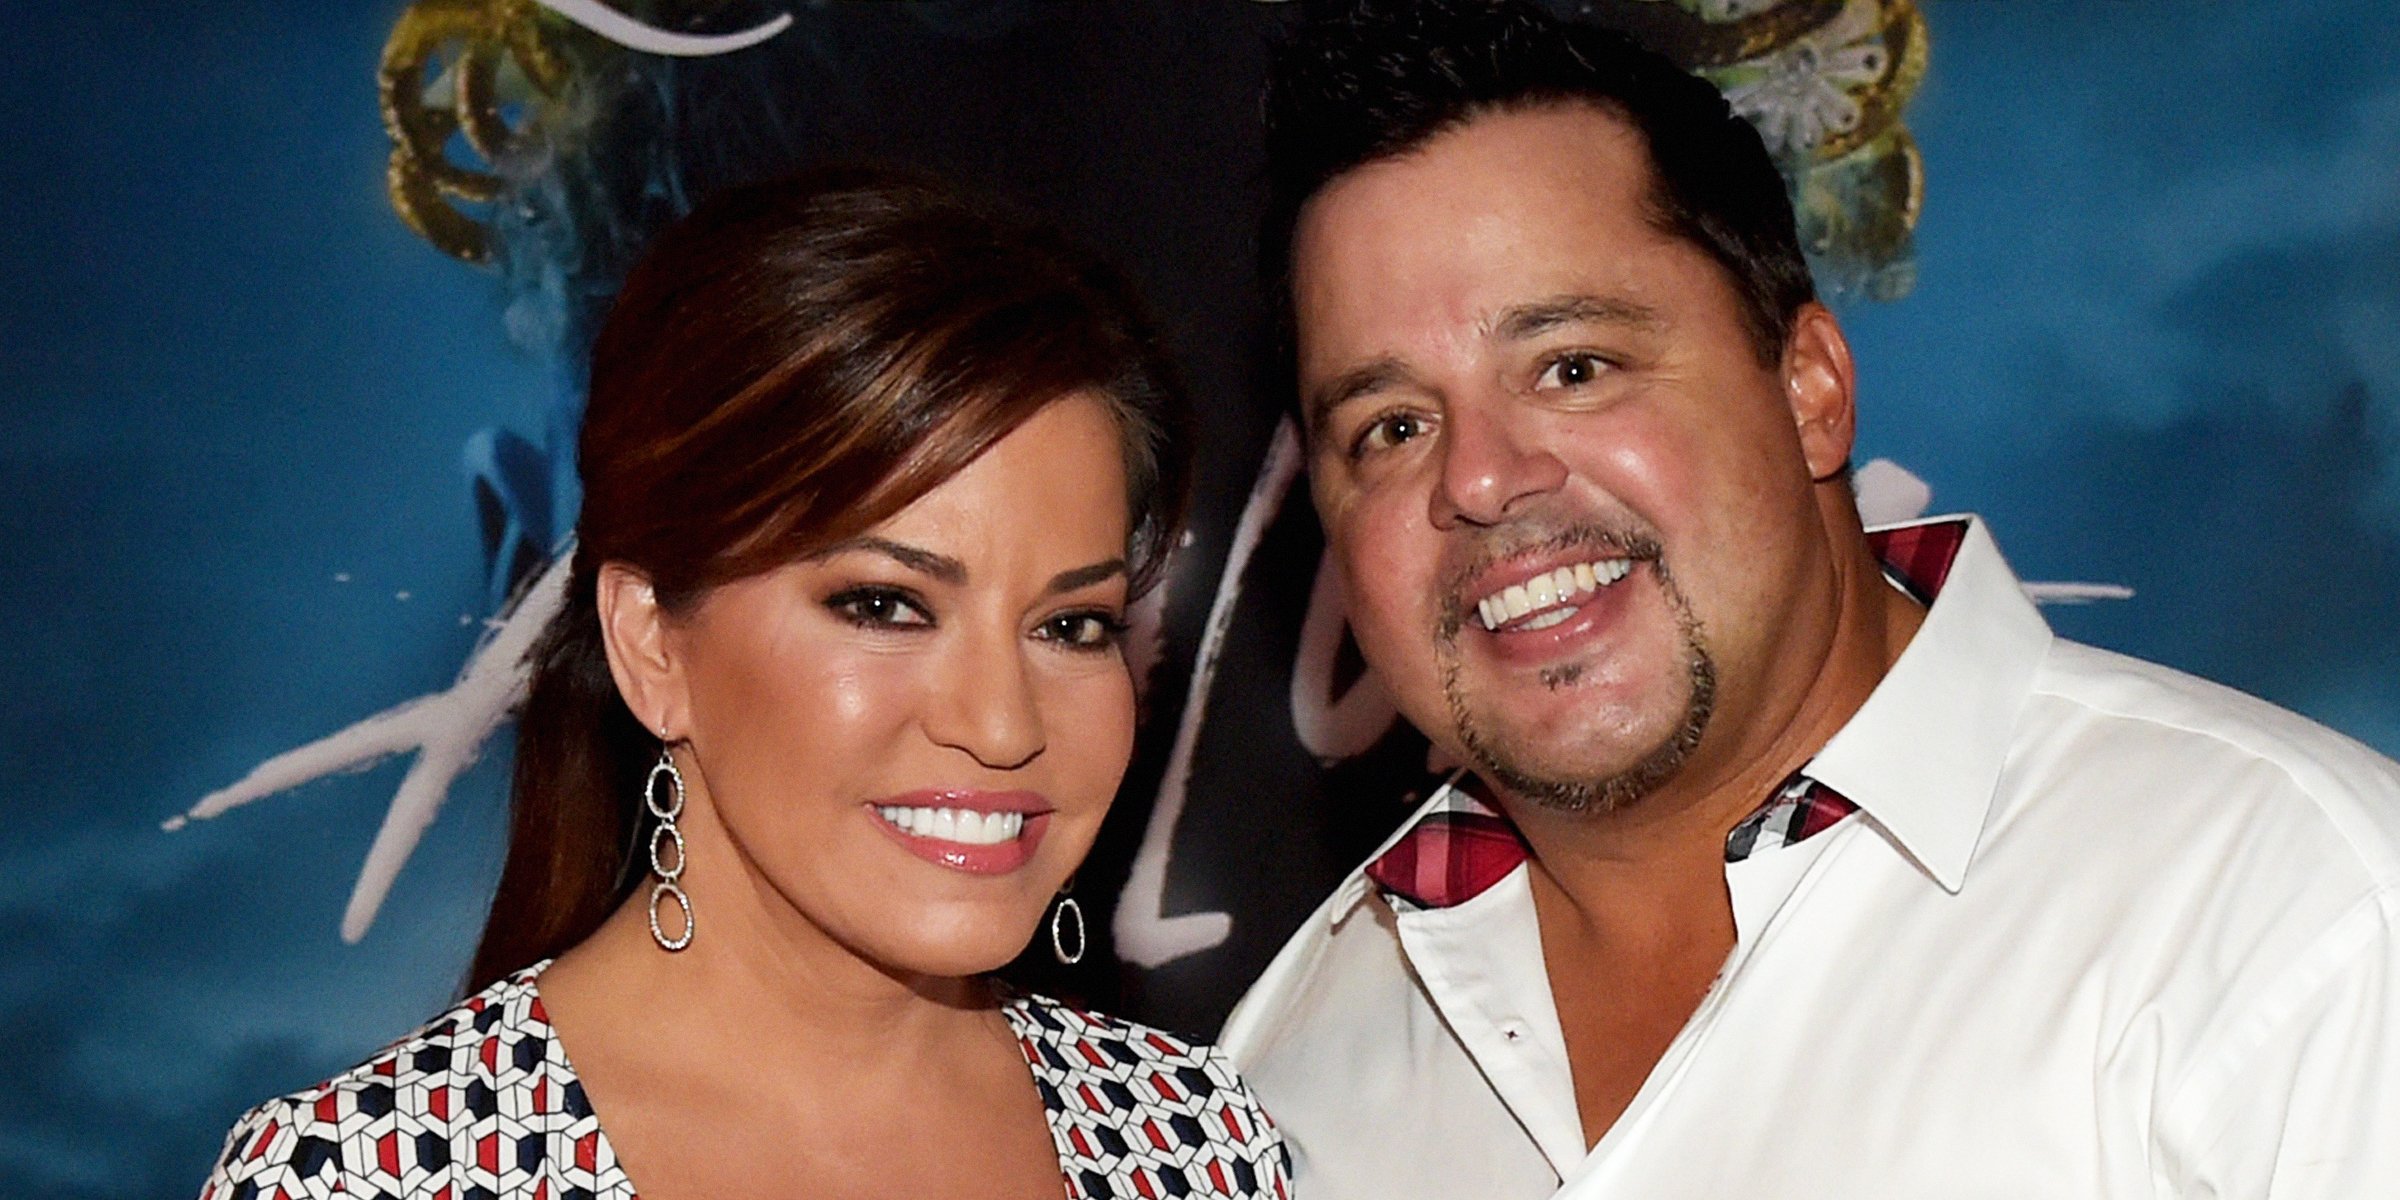 Robin Meade and Tim Yeager | Source: Getty Images